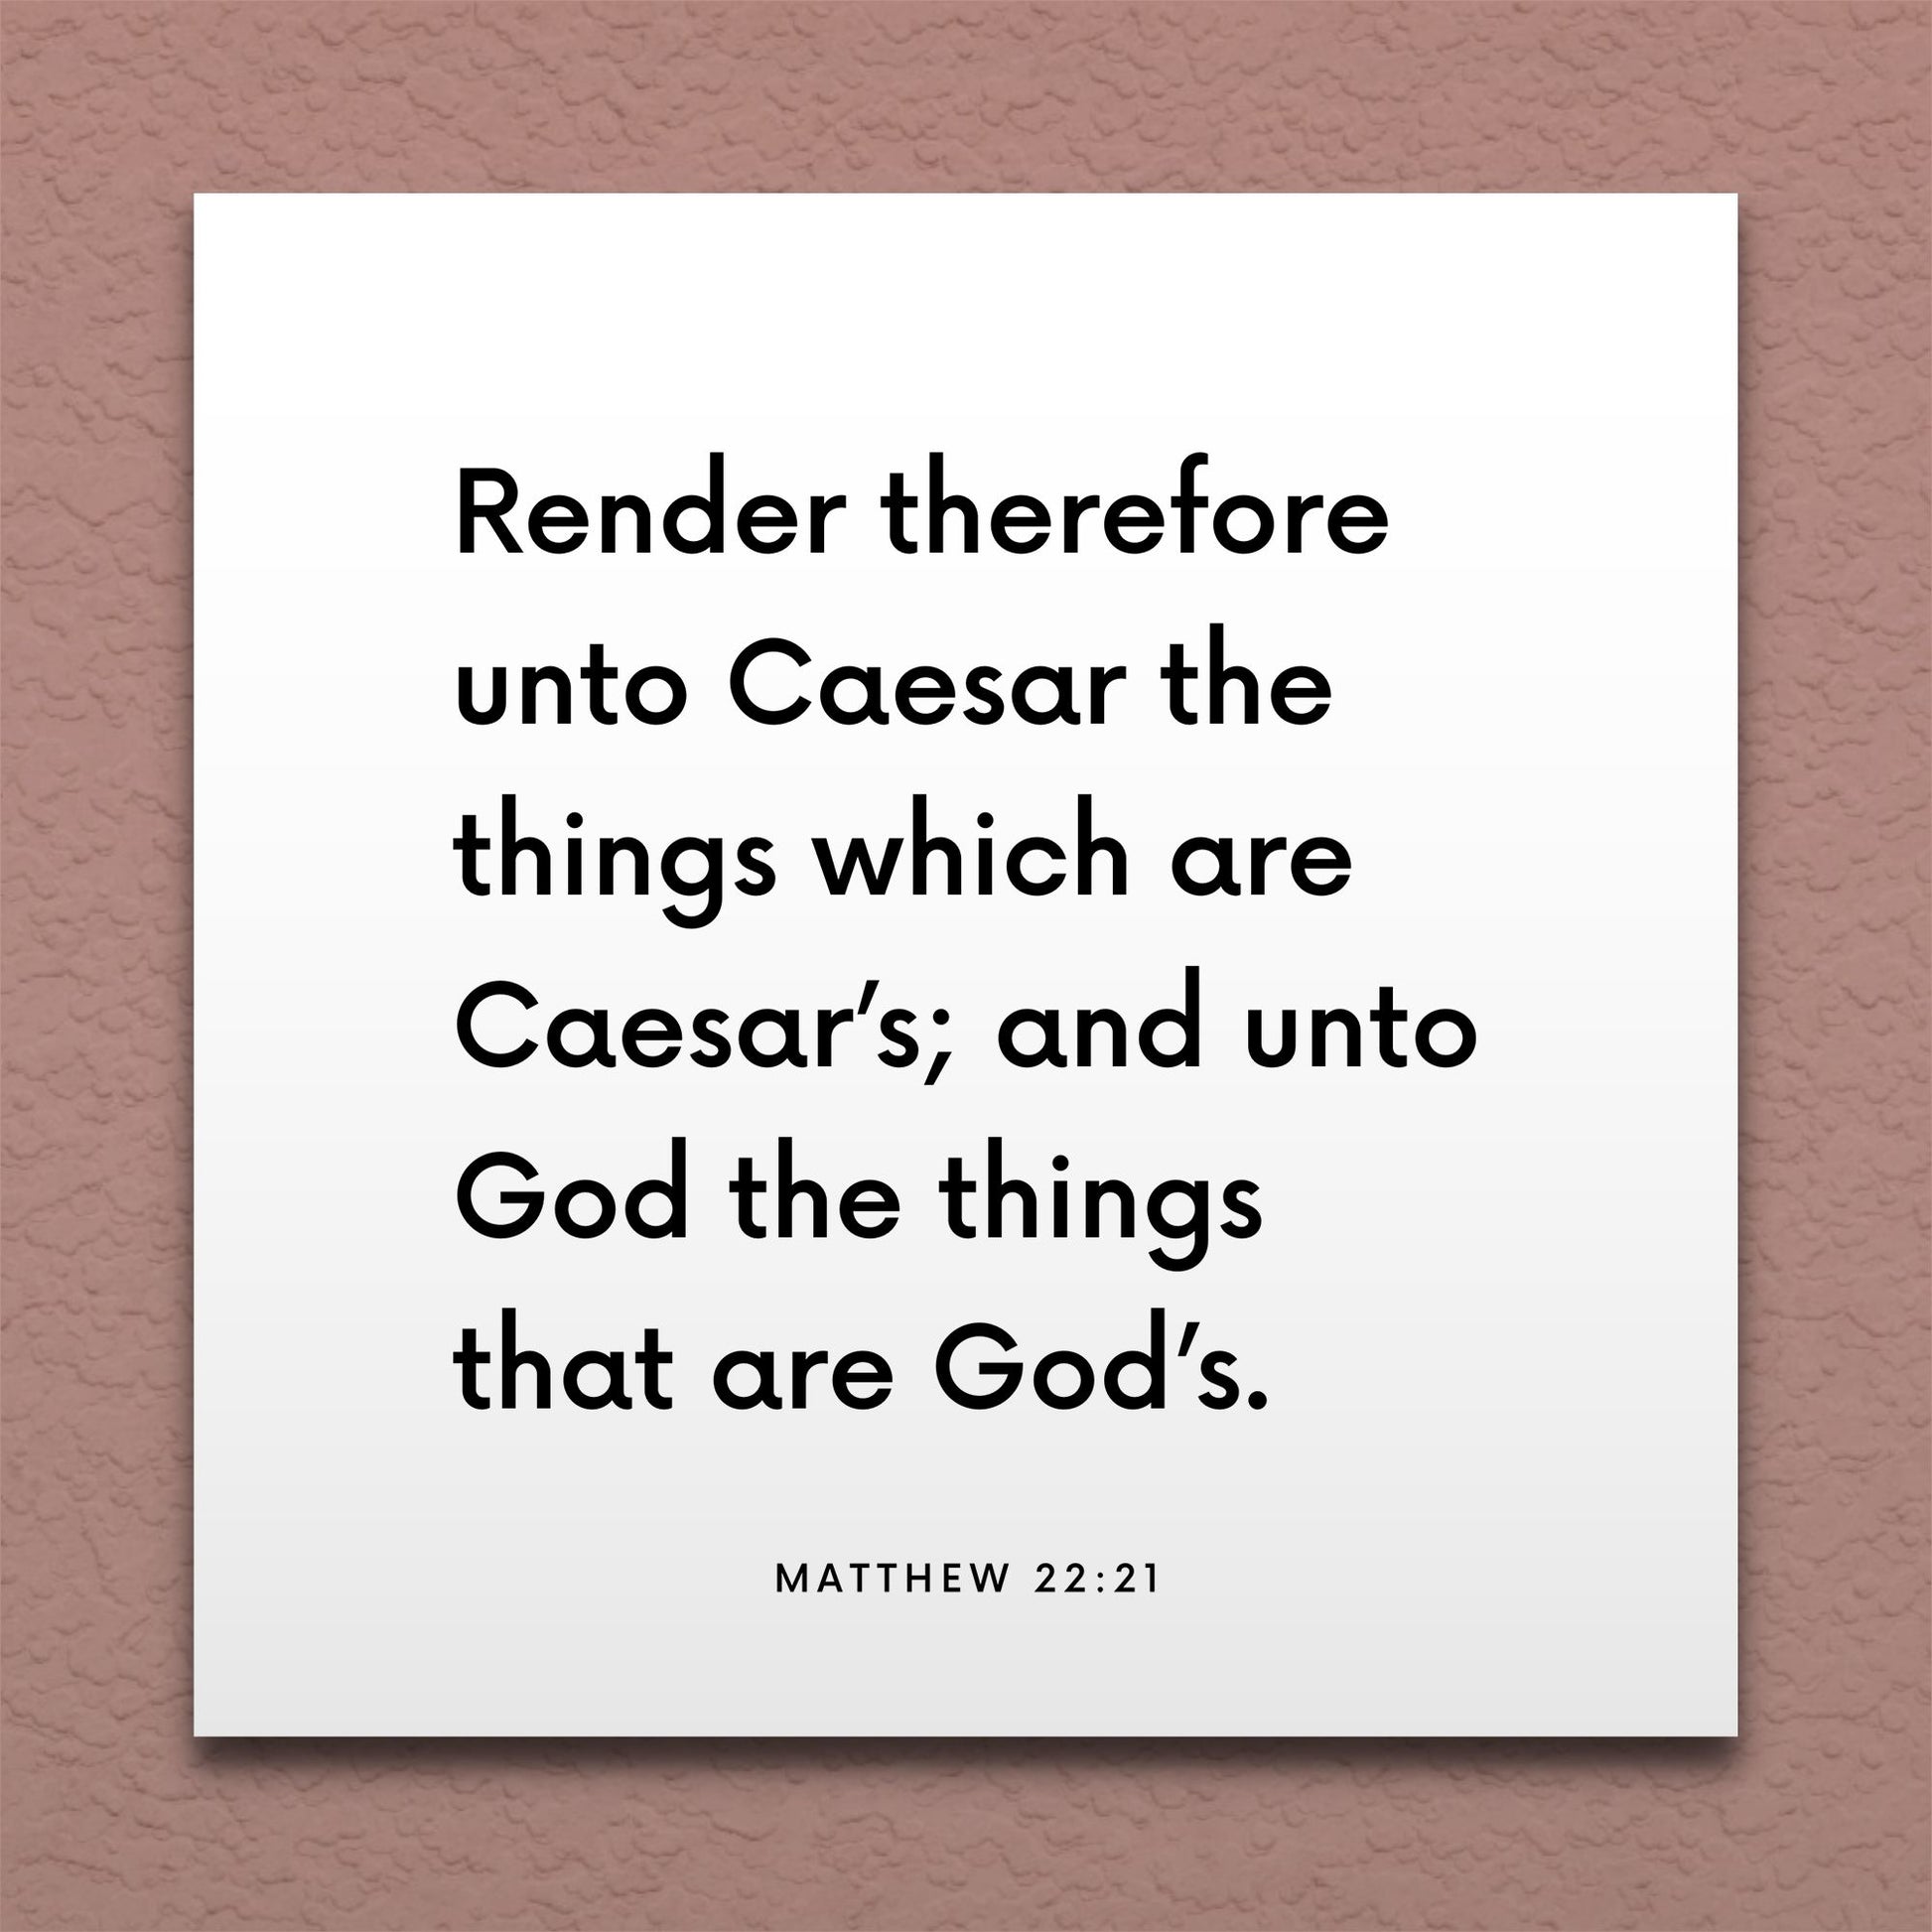 Wall-mounted scripture tile for Matthew 22:21 - "Render therefore unto Caesar the things which are Caesar’s"